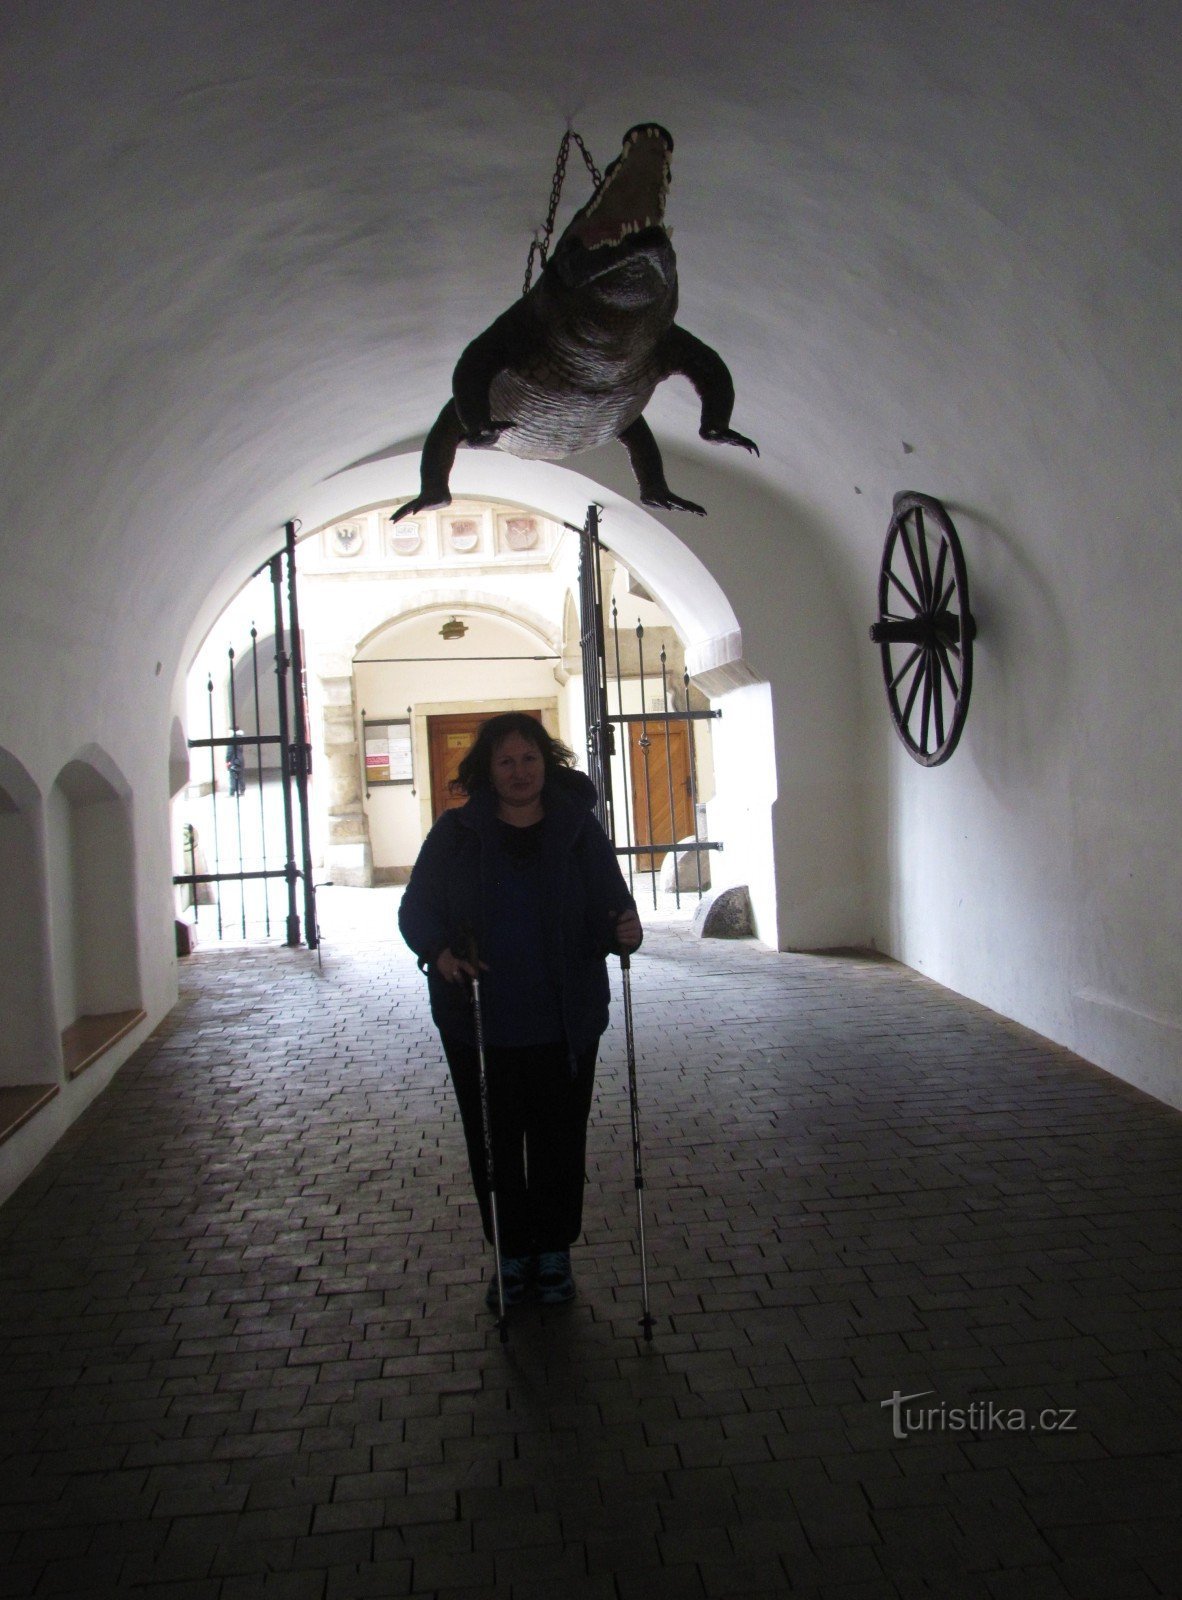 Behind the Brno Dragon to the Old Town Hall